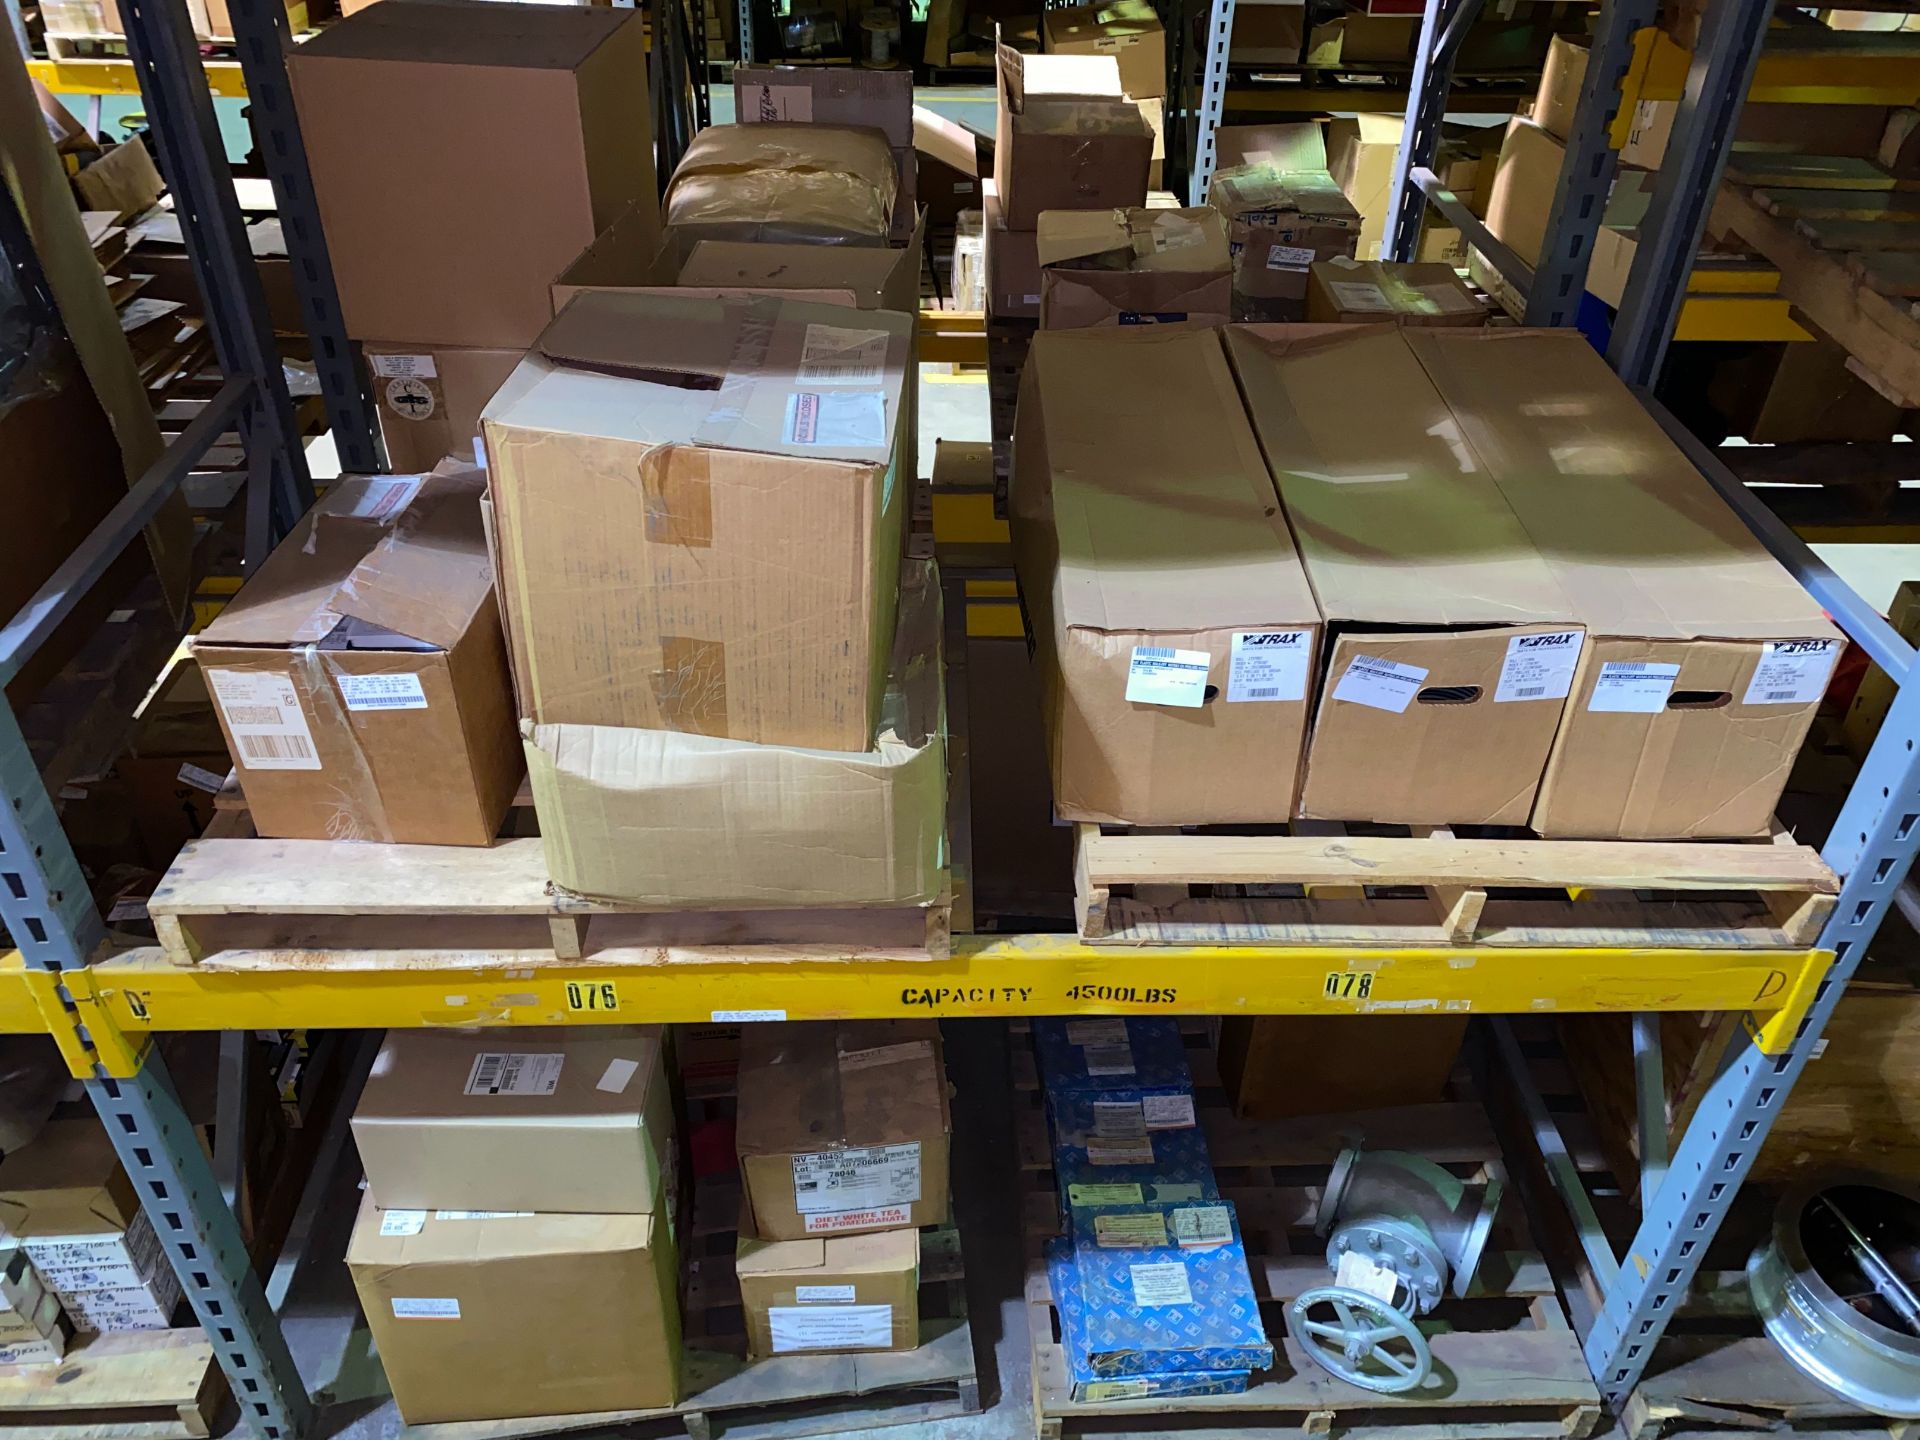 (8) PALLETS OF MAINTENANCE & REPAIR PARTS ON THE FLOOR AND (3) PALLET RACK SHELVES (NO SHELVING)